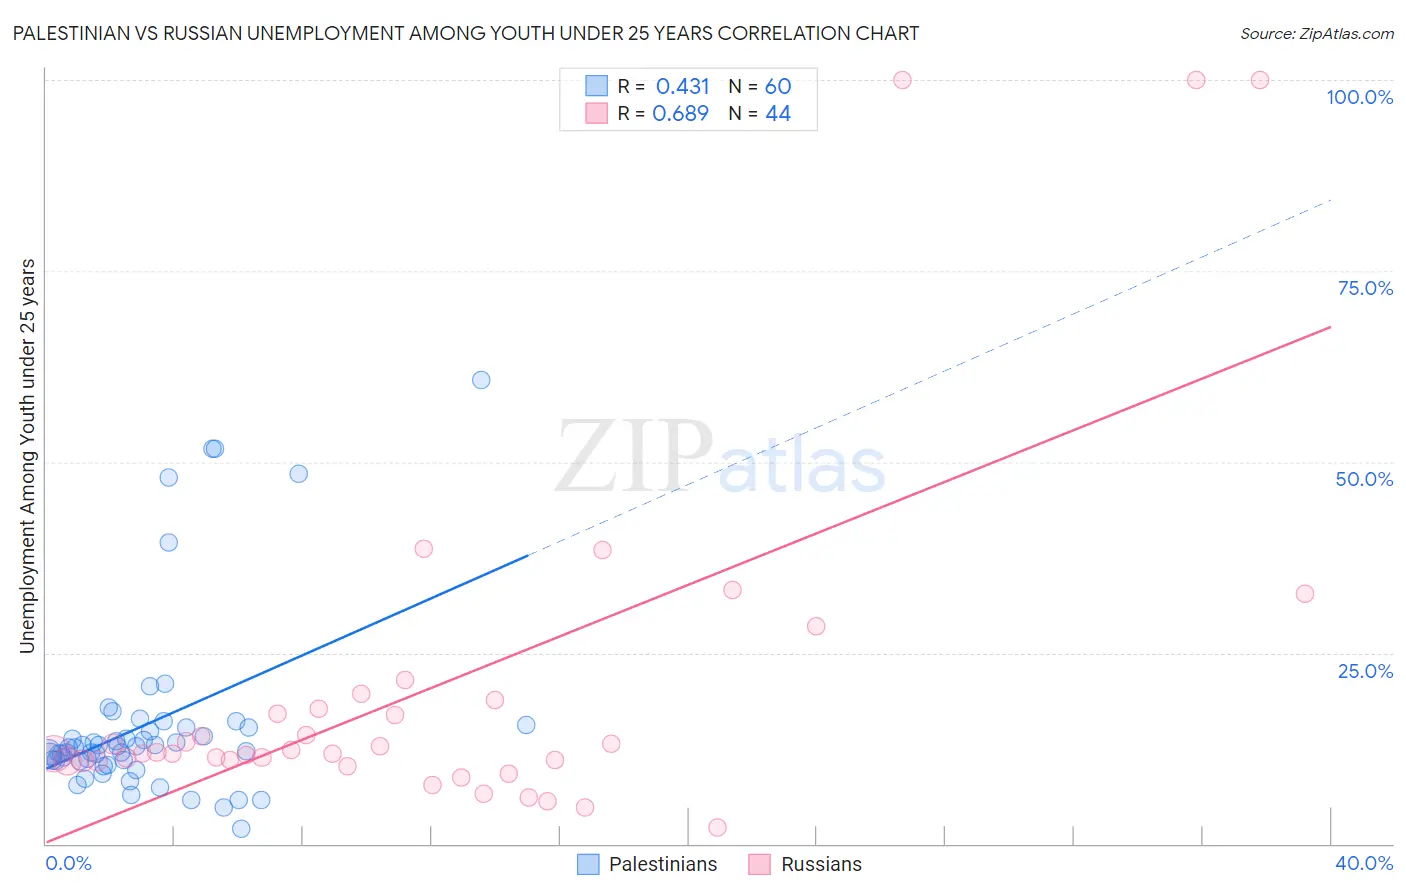 Palestinian vs Russian Unemployment Among Youth under 25 years